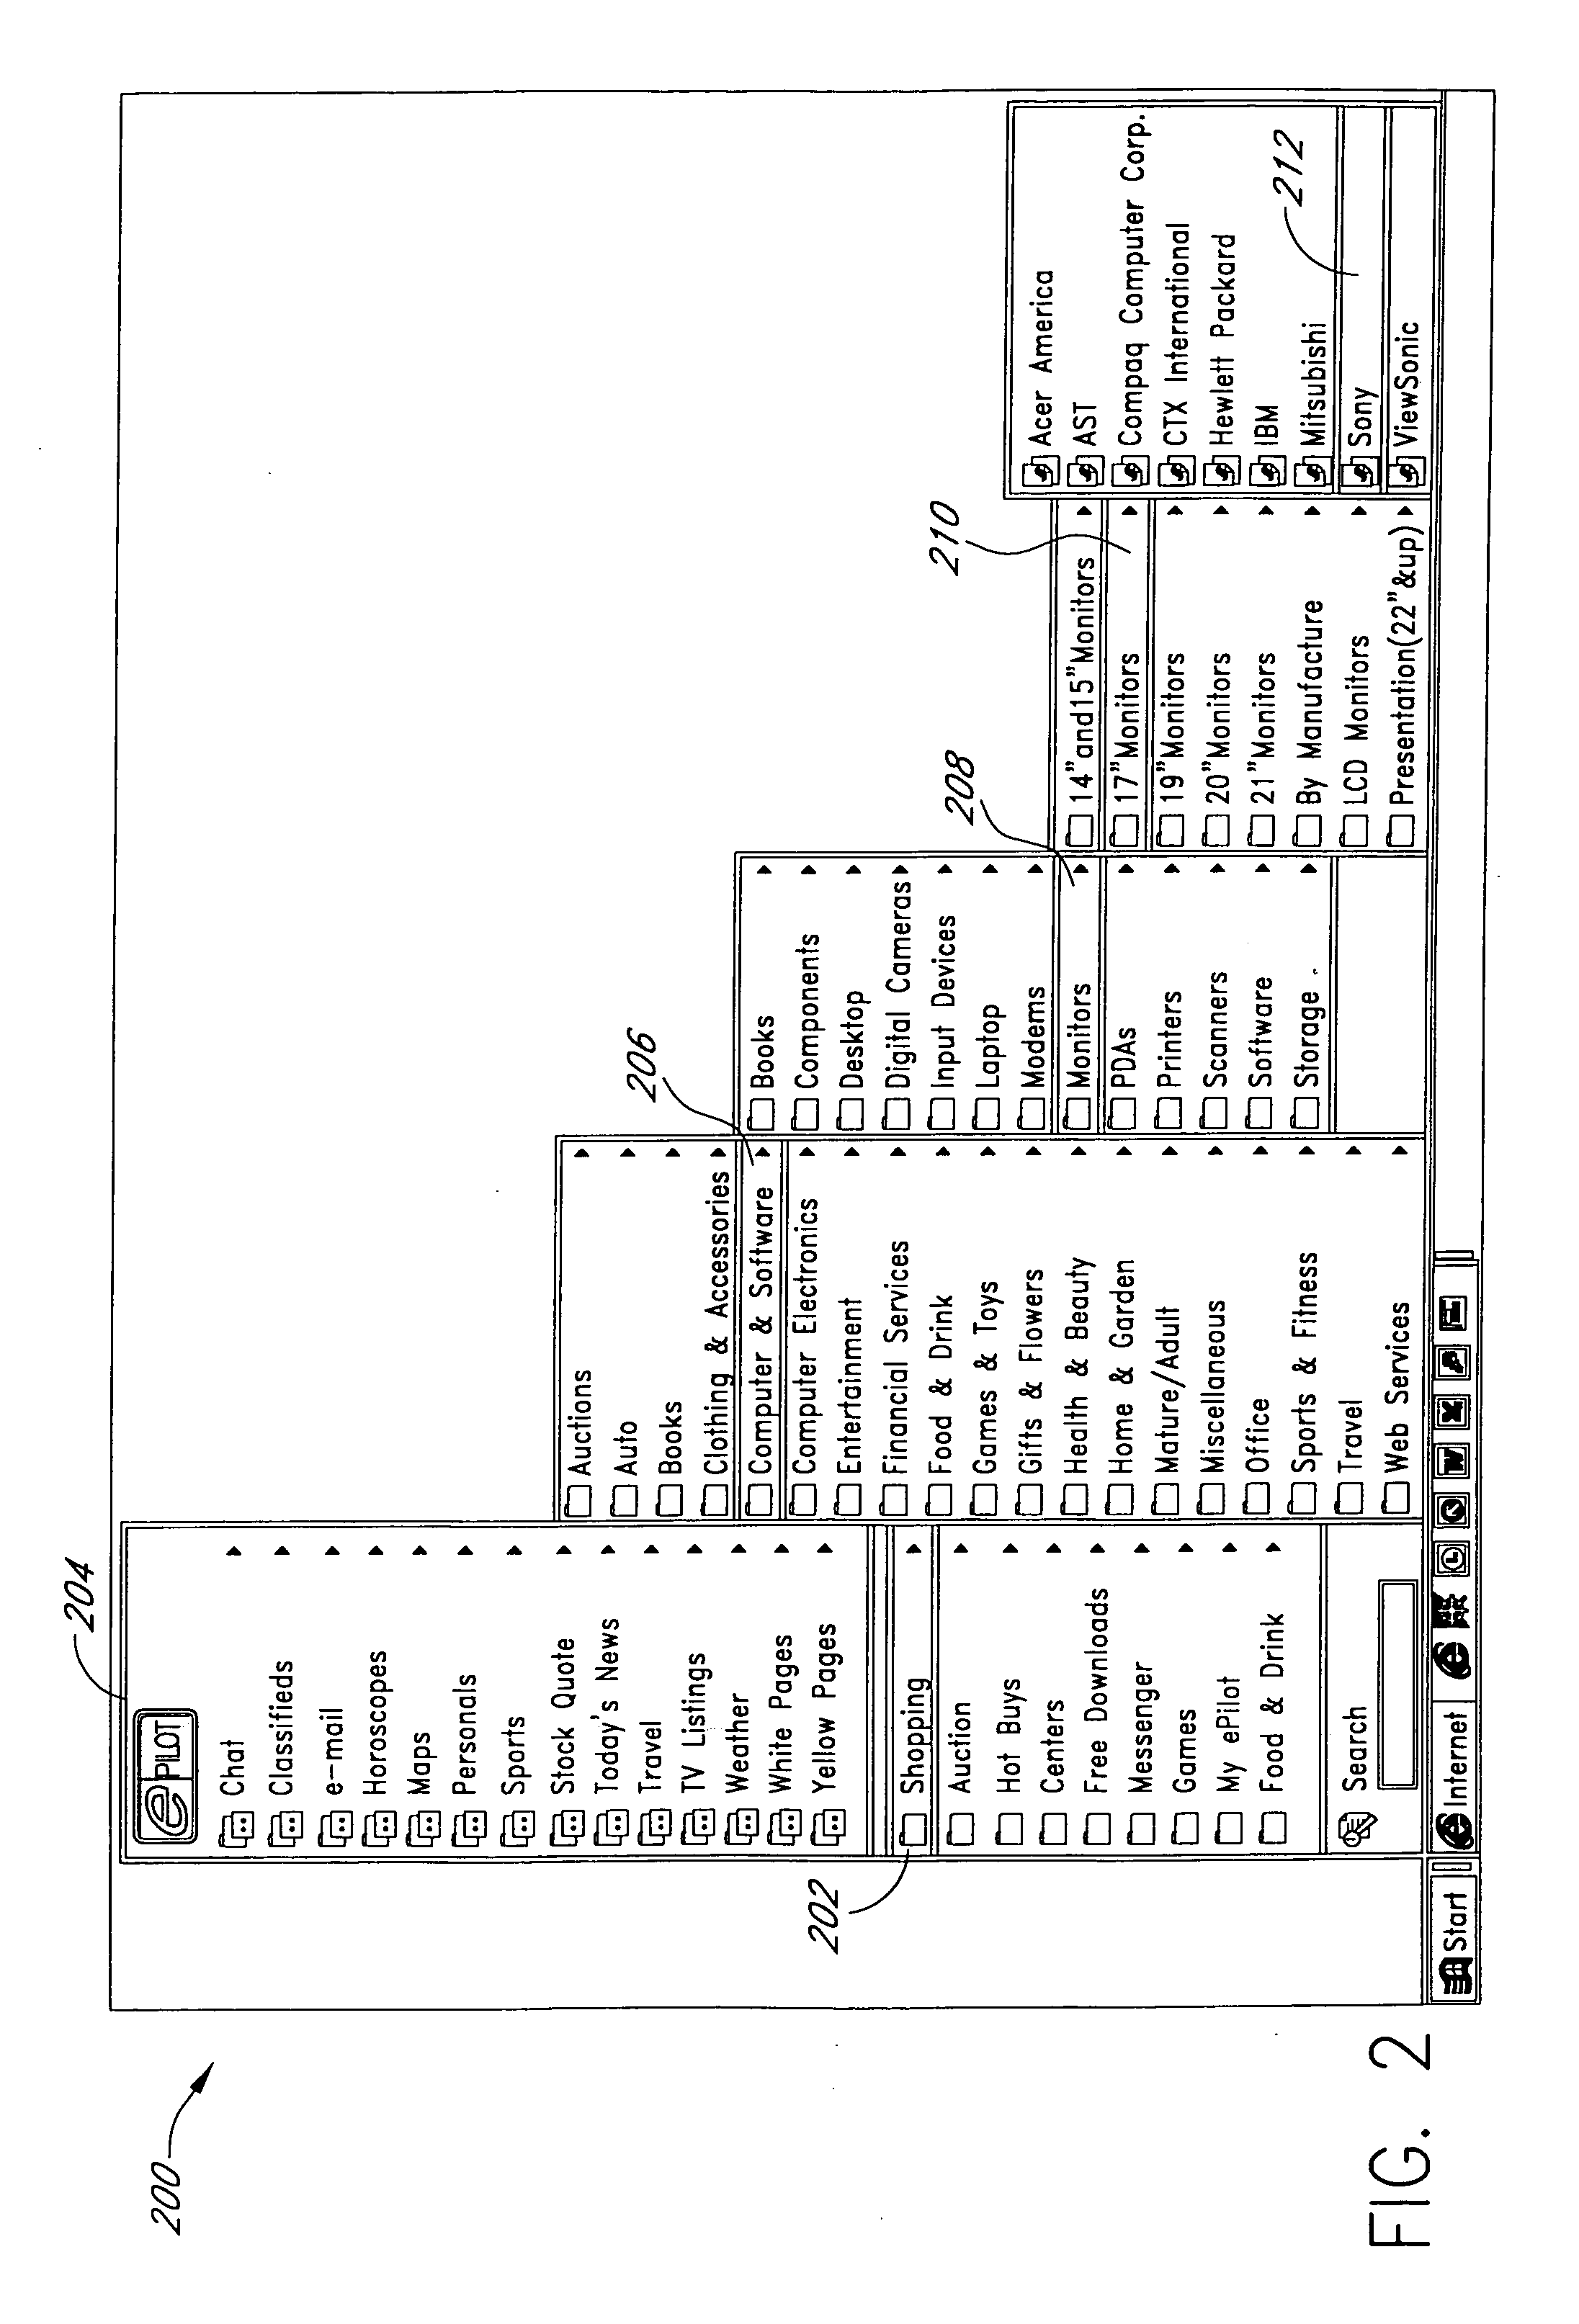 Methods and systems for a dynamic networked commerce architecture